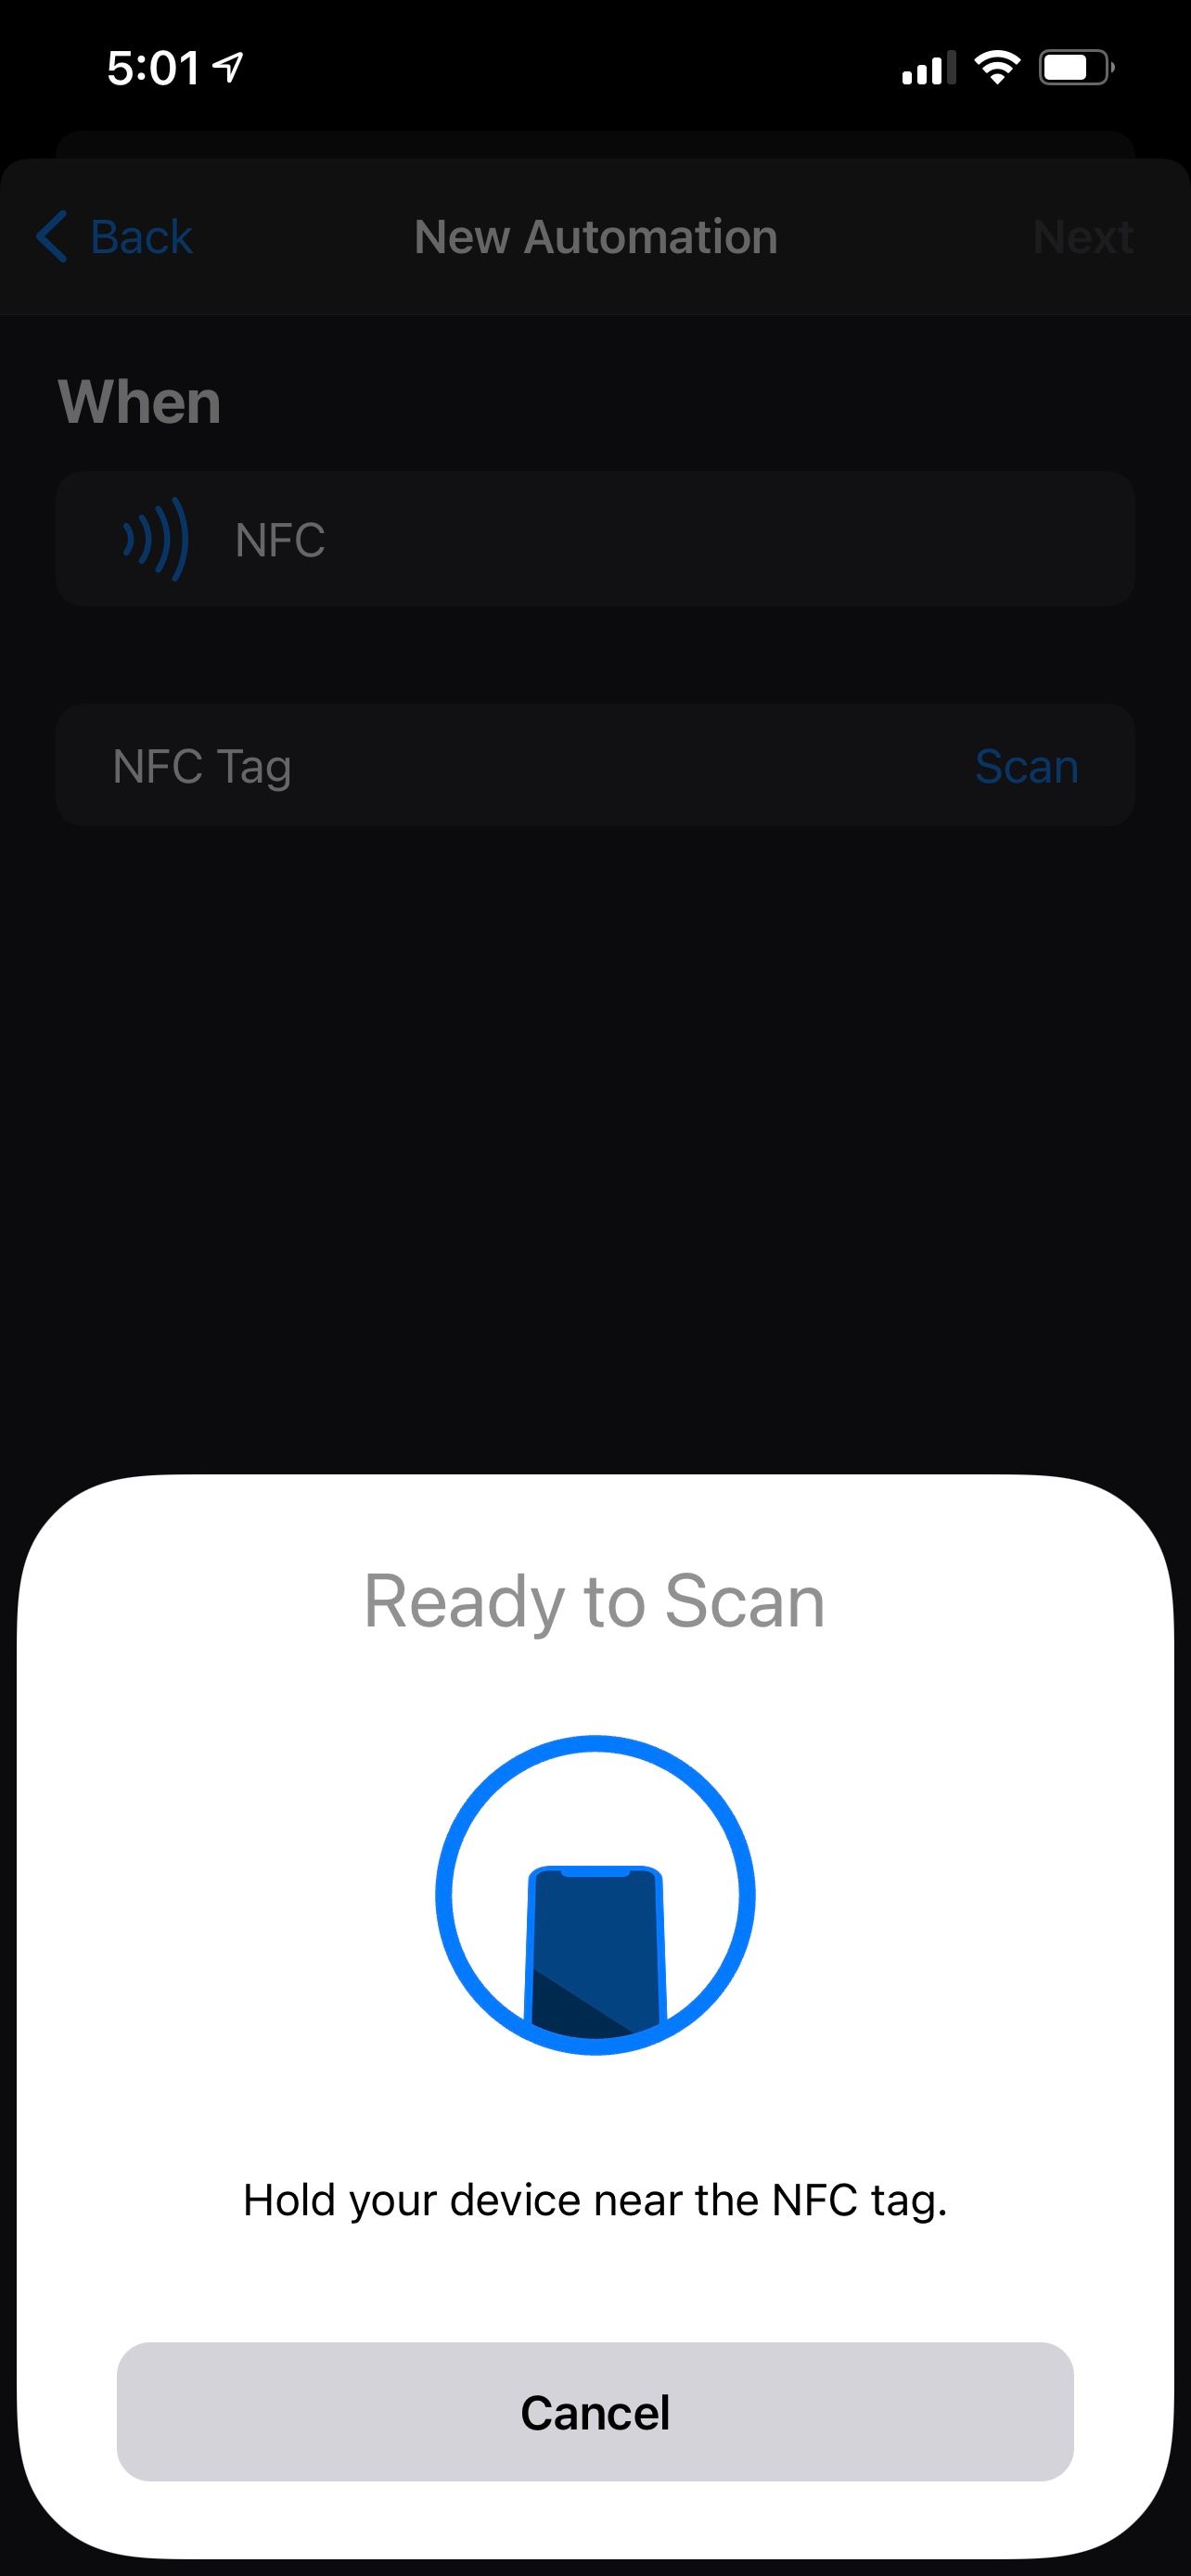 Scan NFC interface for automation